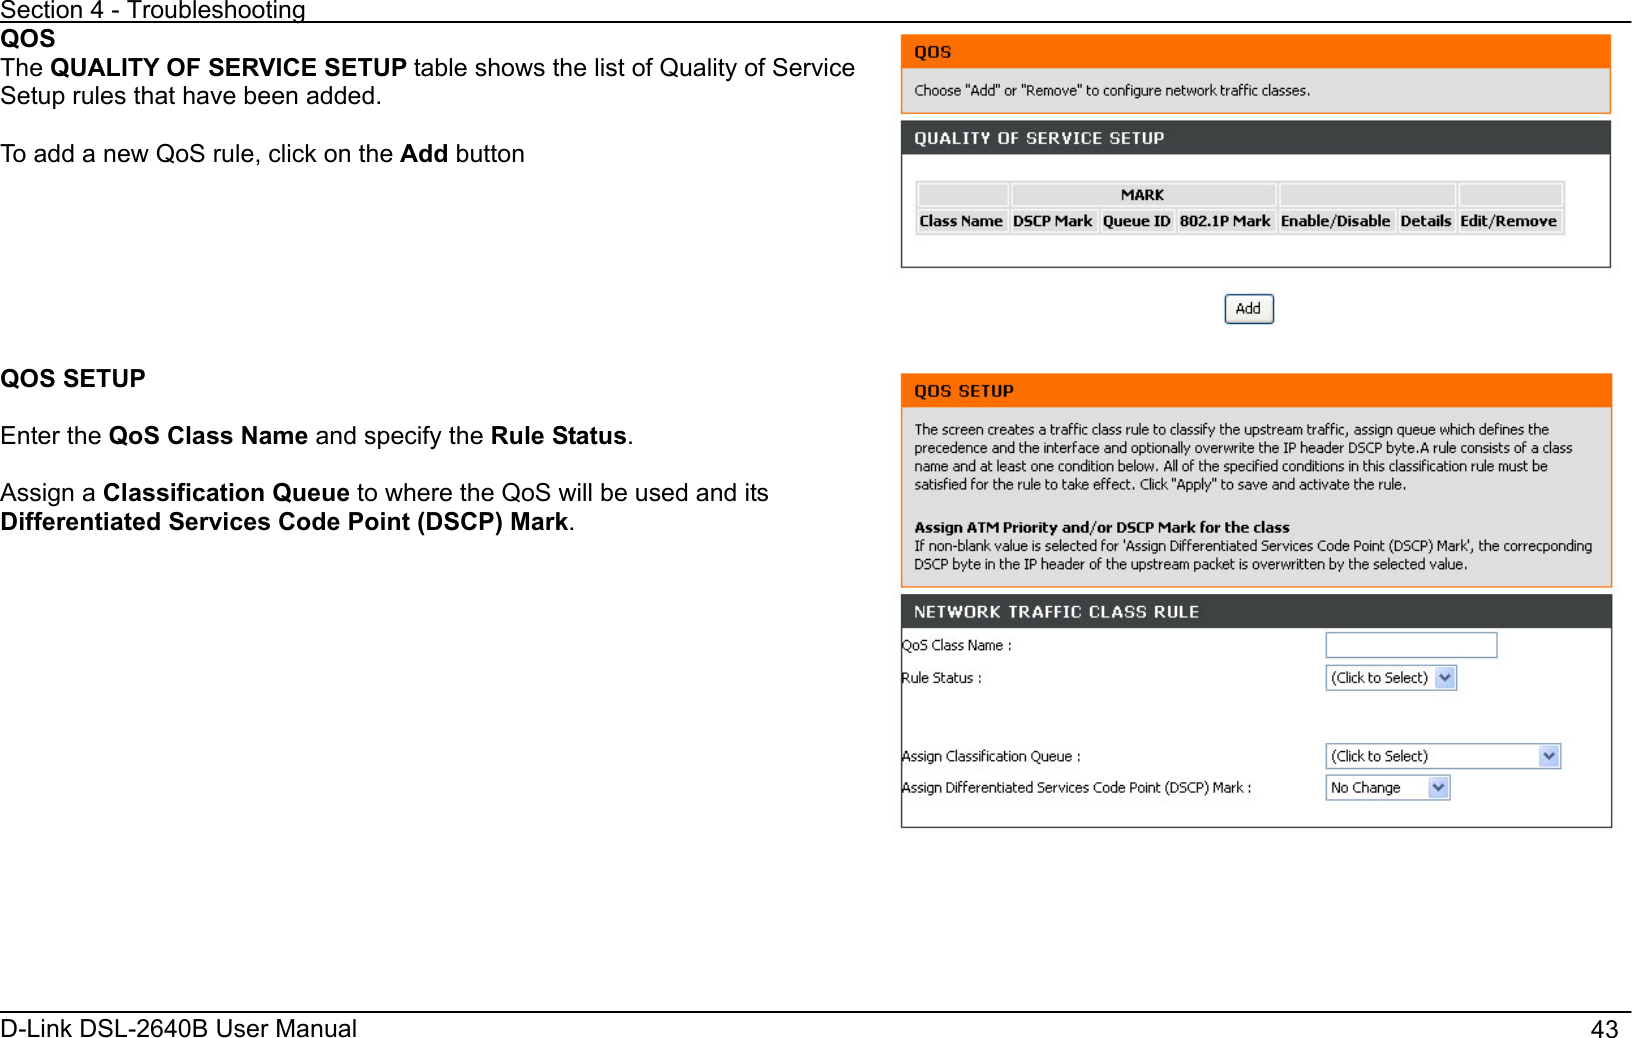 Section 4 - Troubleshooting D-Link DSL-2640B User Manual                                       43QOSThe QUALITY OF SERVICE SETUP table shows the list of Quality of Service Setup rules that have been added. To add a new QoS rule, click on the Add buttonQOS SETUP Enter the QoS Class Name and specify the Rule Status.Assign a Classification Queue to where the QoS will be used and its Differentiated Services Code Point (DSCP) Mark.